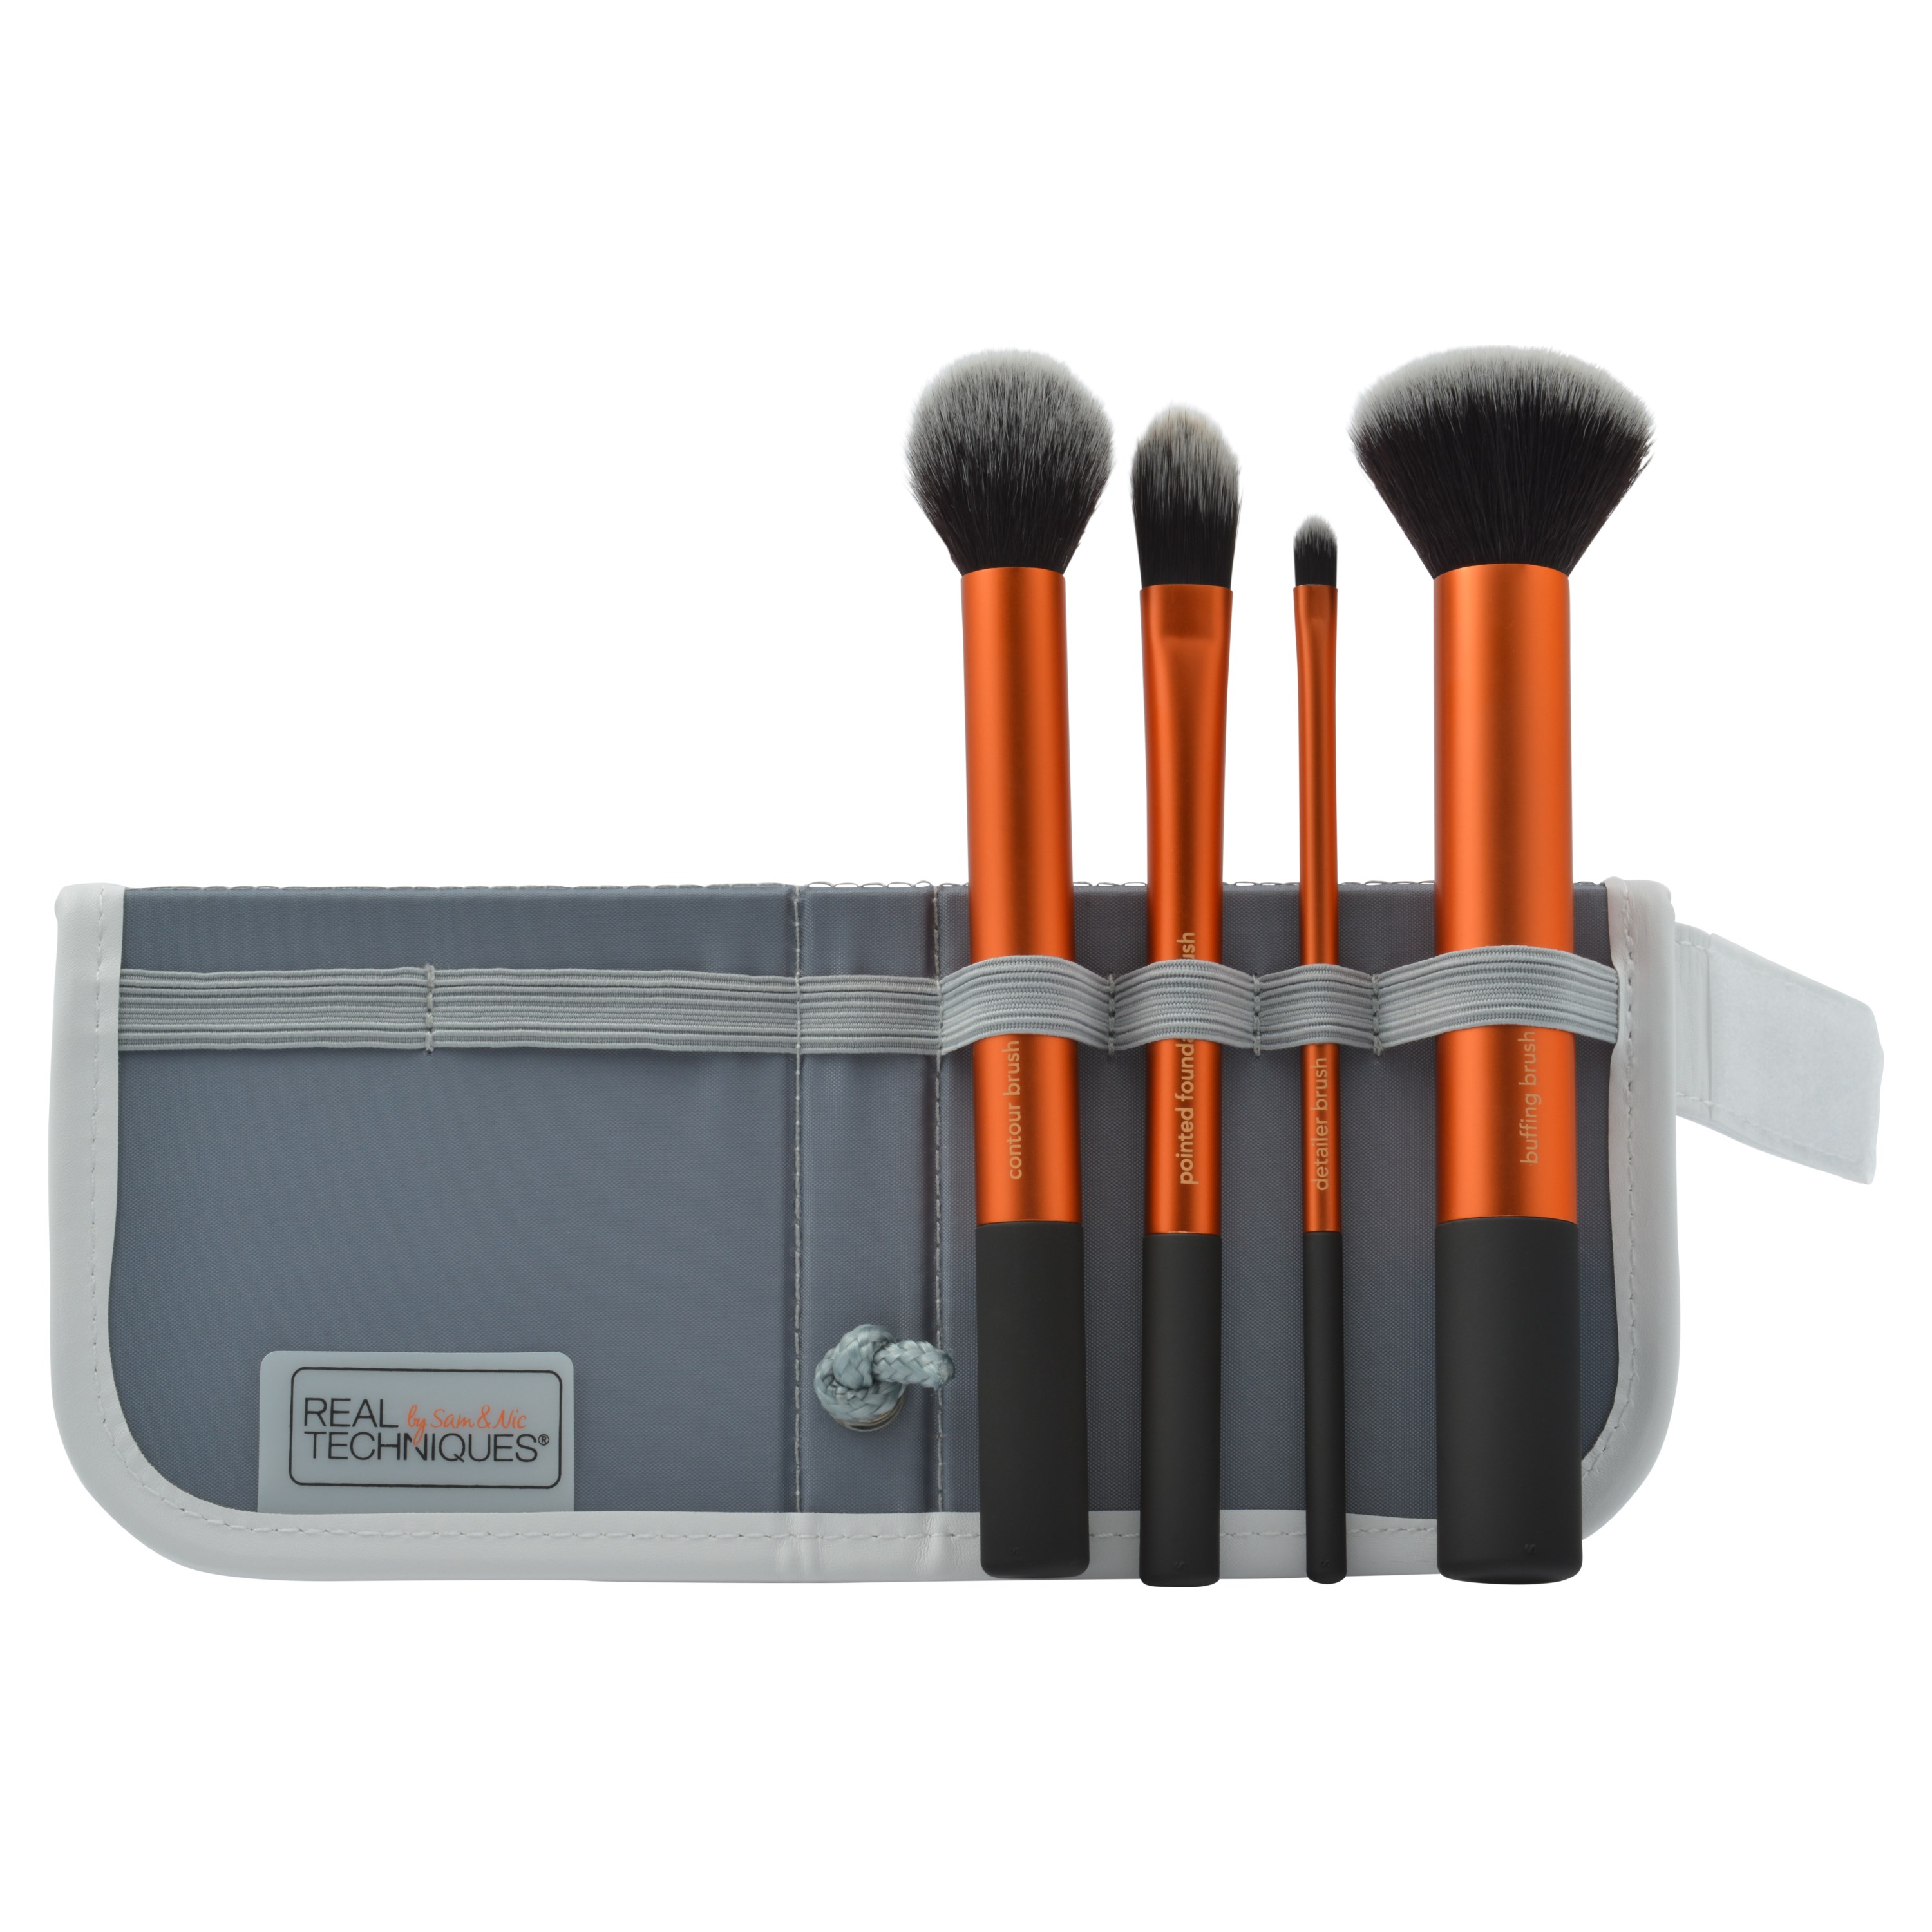 Real Techniques Core Collection Makeup Brush Set - image 4 of 4